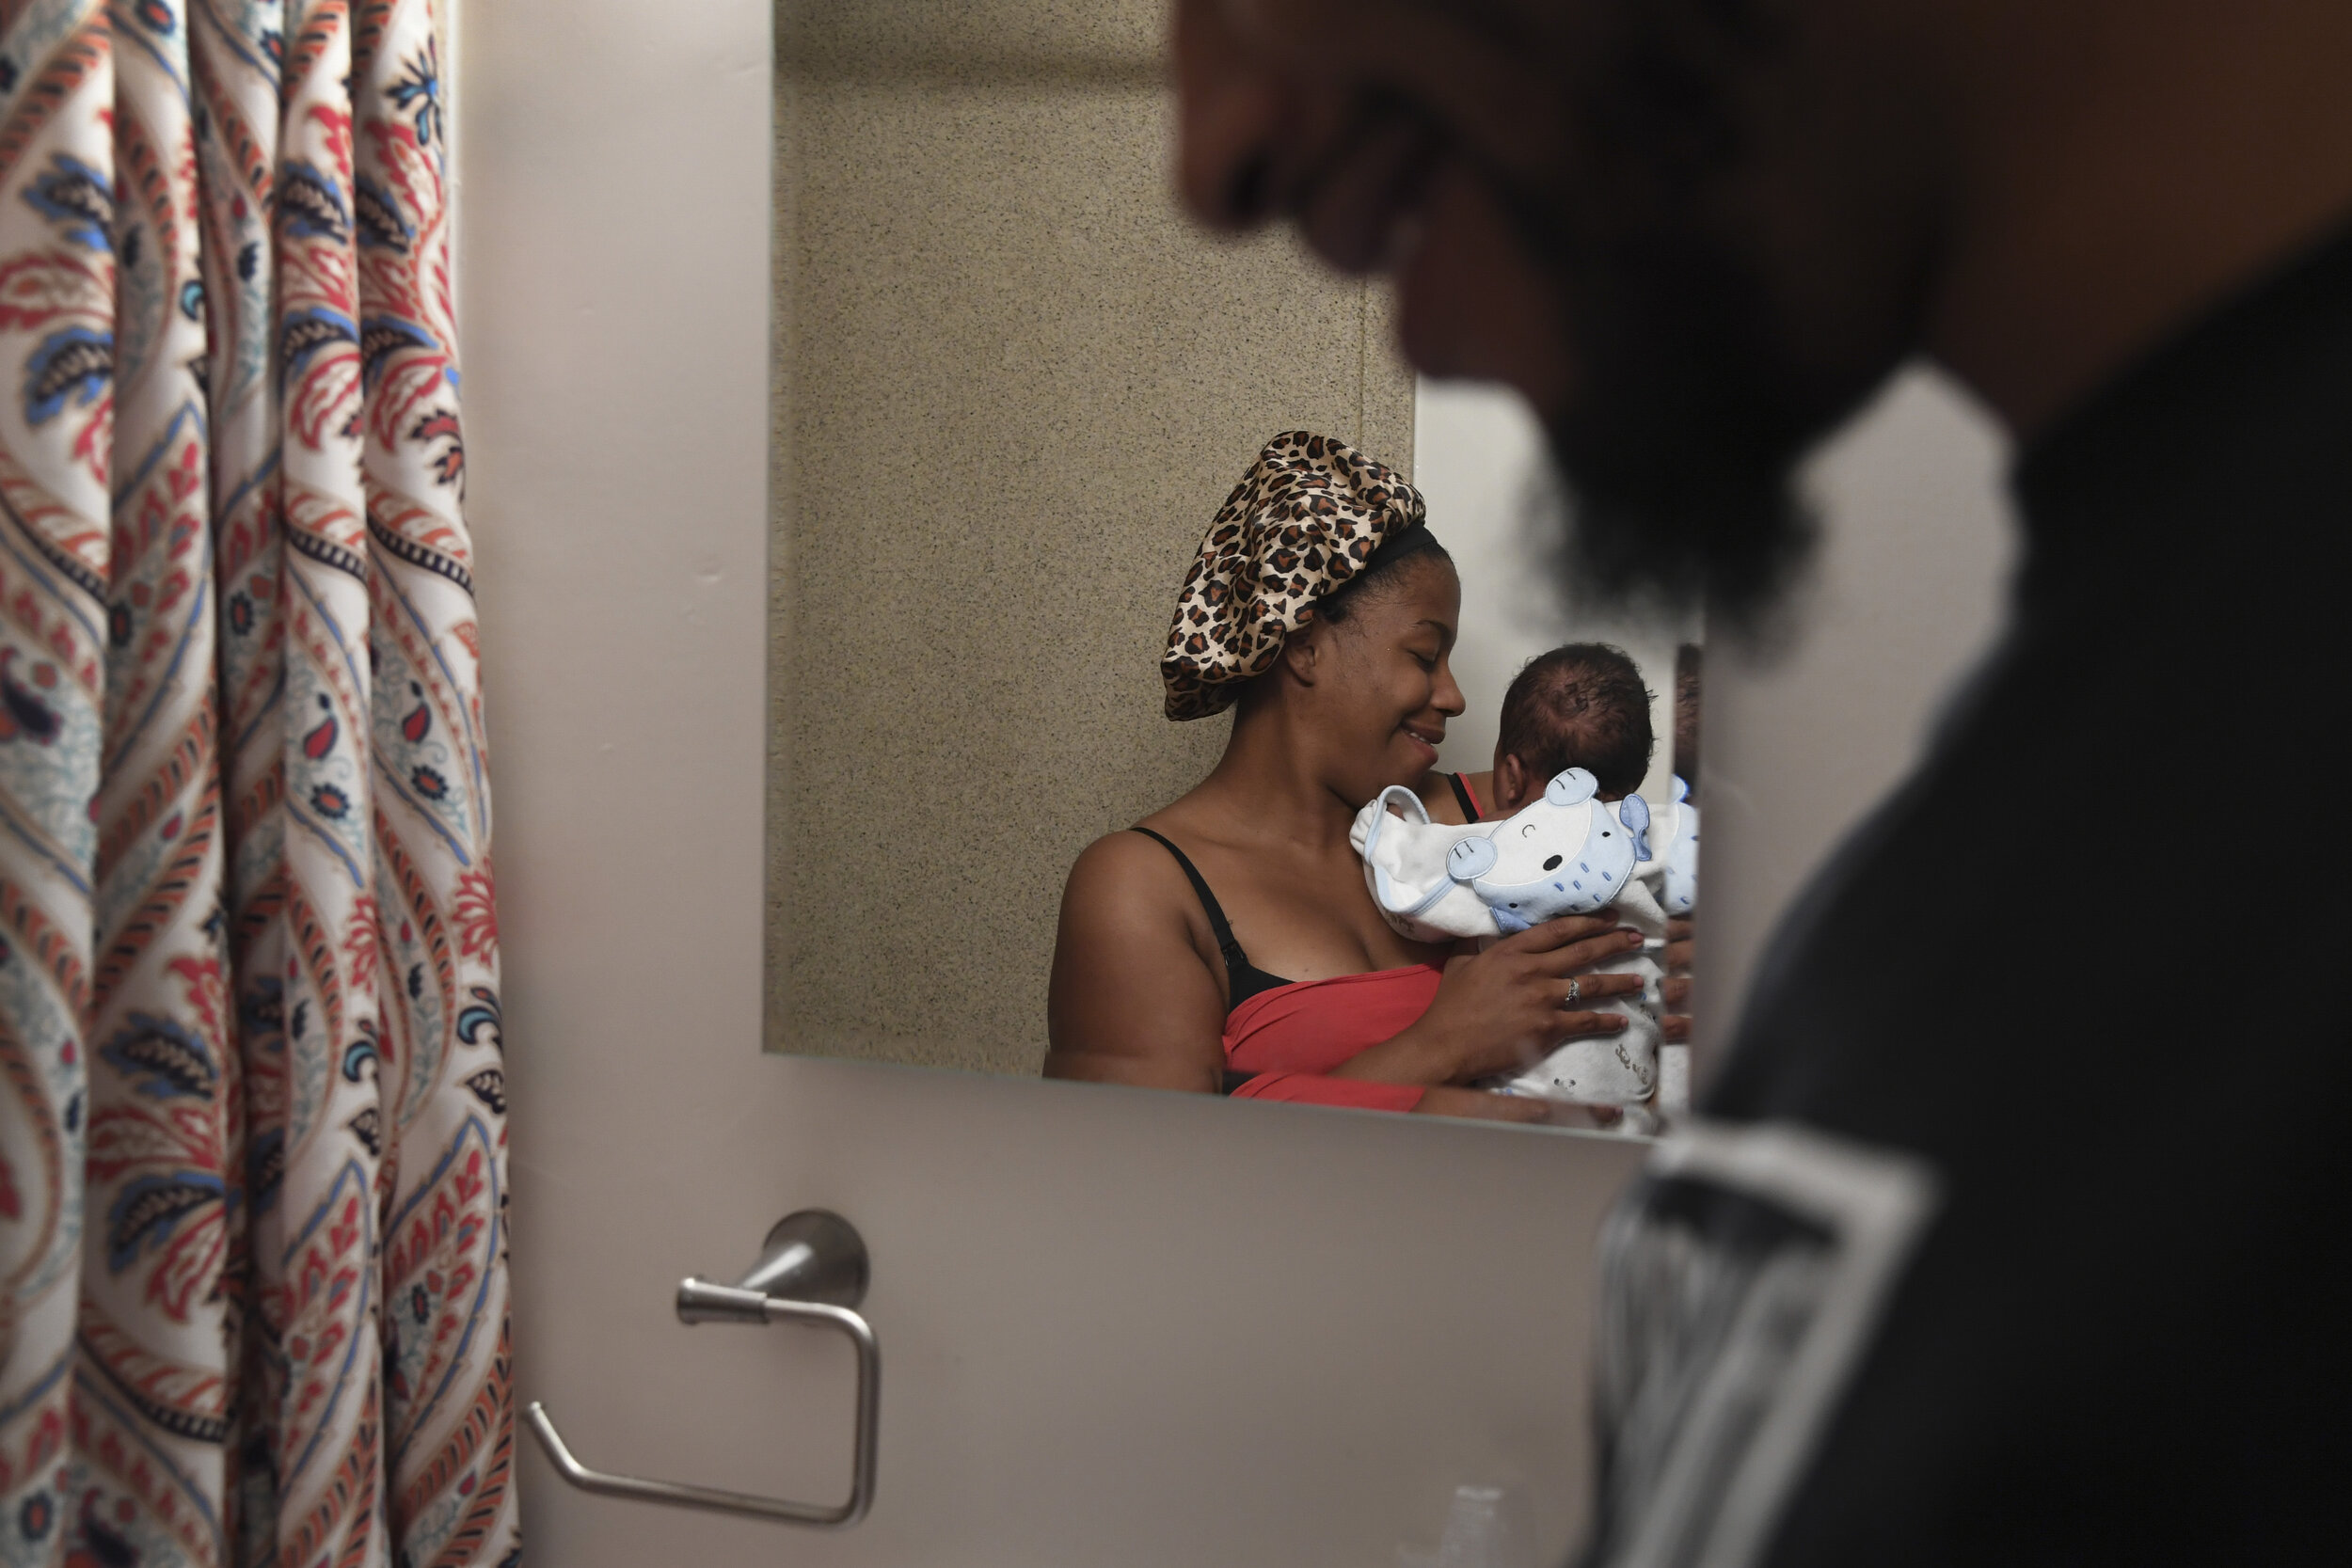  Denis Avery smiles at his girlfriend Adrian Davis and their six-week-old son Cyrus Davis after bath time at their apartment in Monticello, Ny., Oct. 13th, 2019. Davis, who takes classes through the Sullivan County Breastfeeding Coalition, says breas